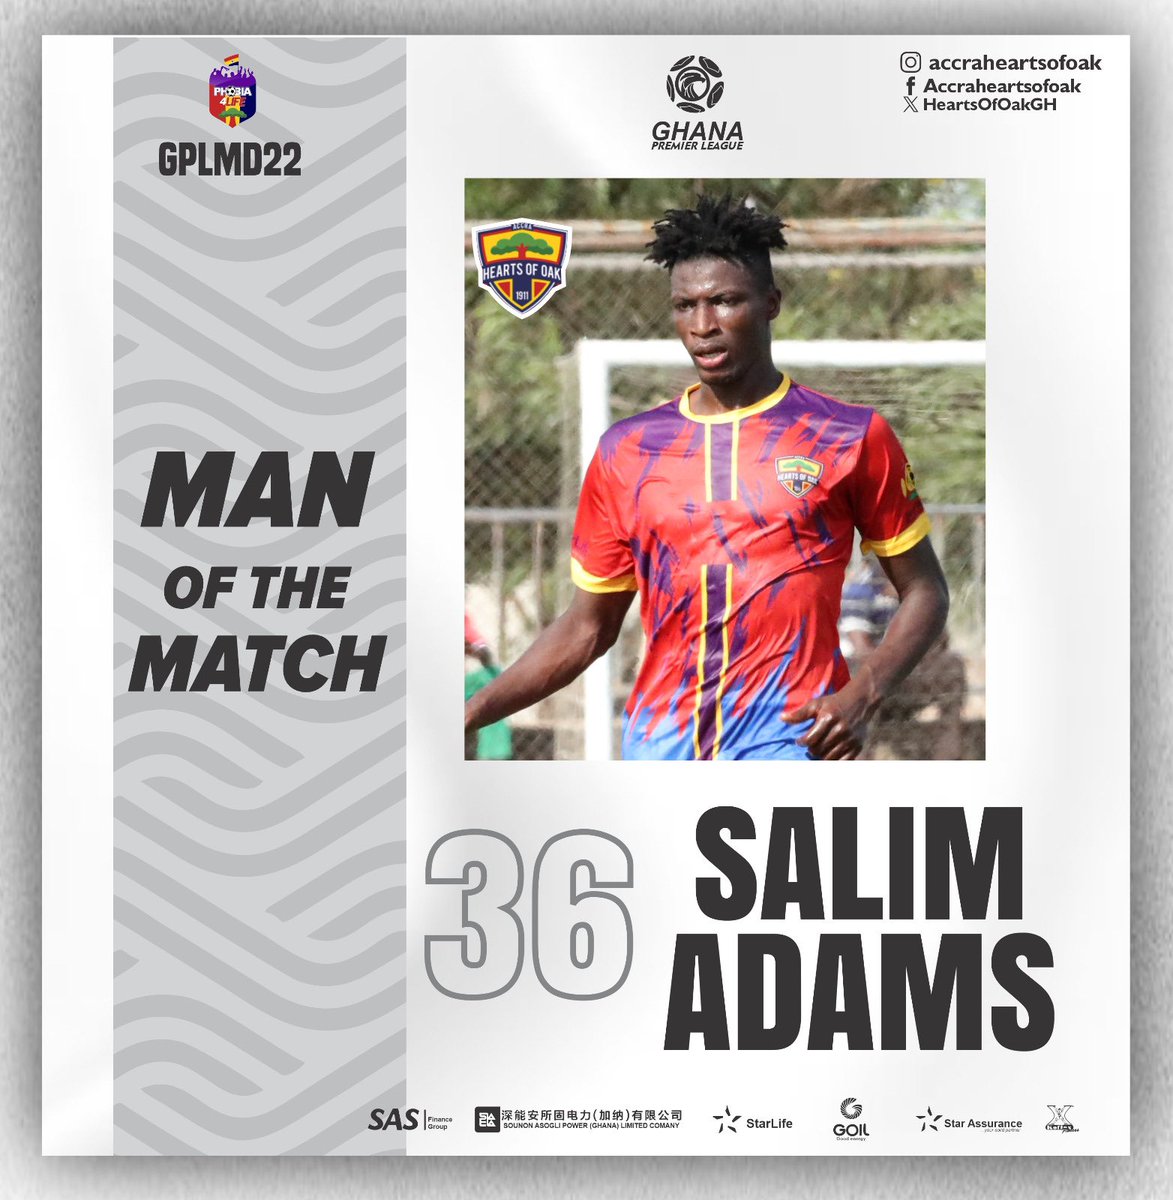 🔴🟡🔵 || MAN OF THE MATCH Salim Adams wins Man of the Match! What a performance from our star player leading us to victory! ⚽️🌟 #AHOSC #PositiveEnergy #StarLife